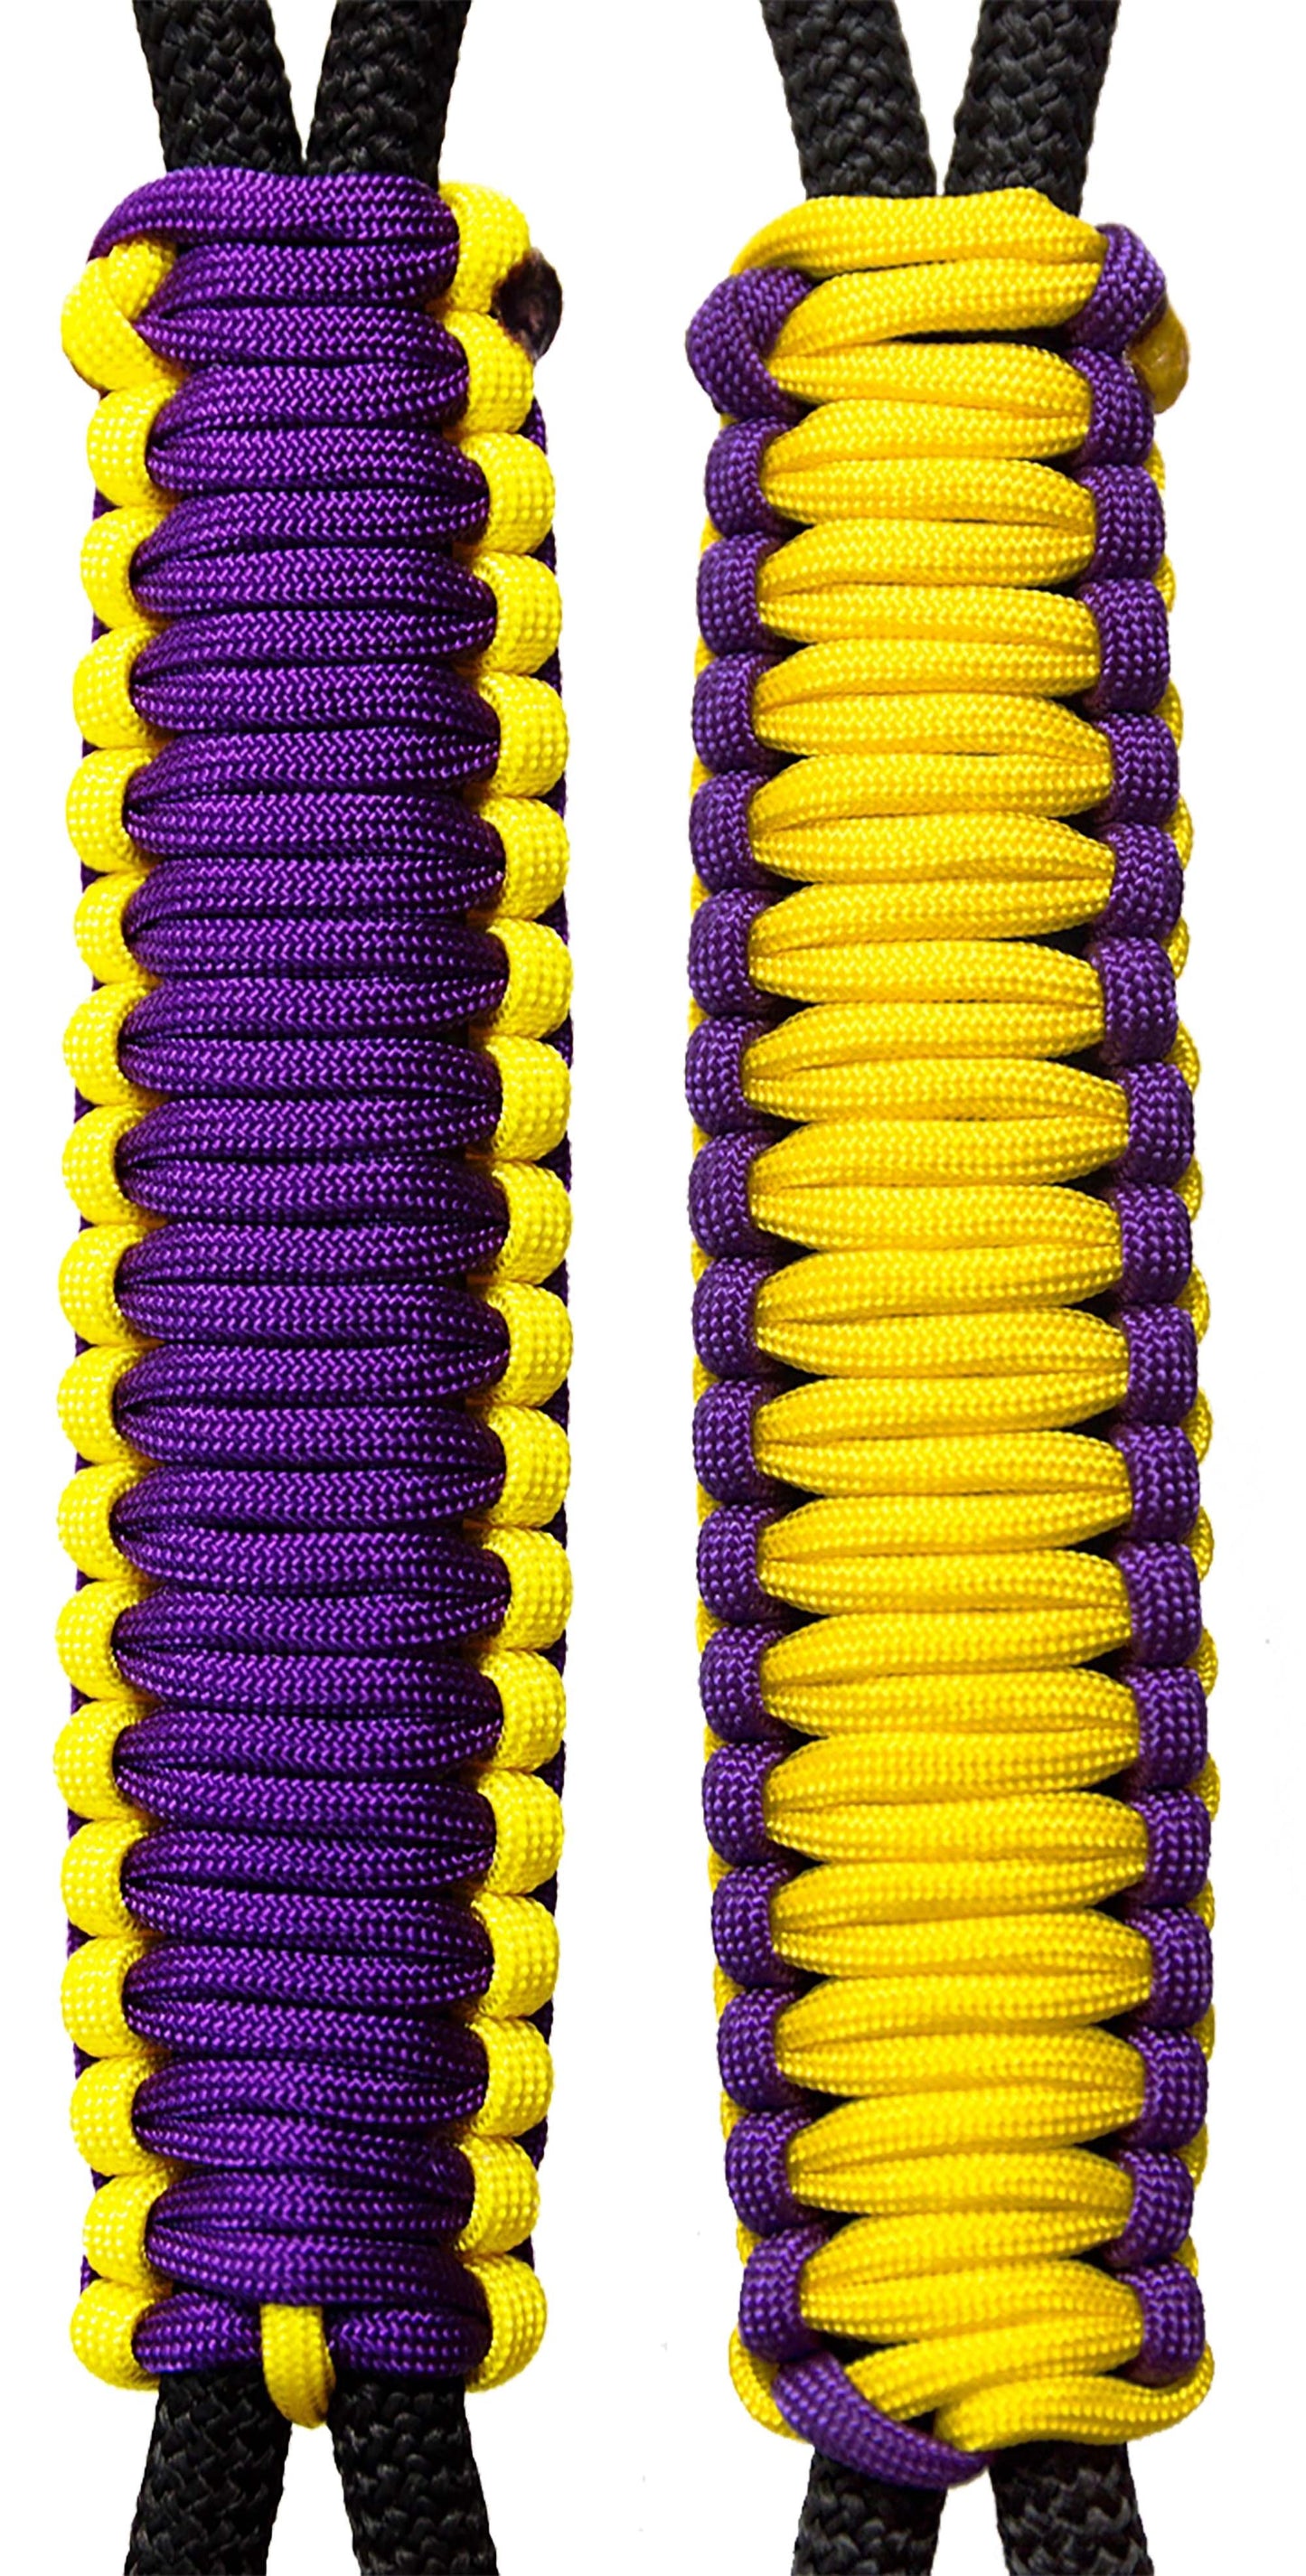 Purple & Yellow C024C027 - Paracord Handmade Handles for Stainless Steel Tumblers - Made in USA!